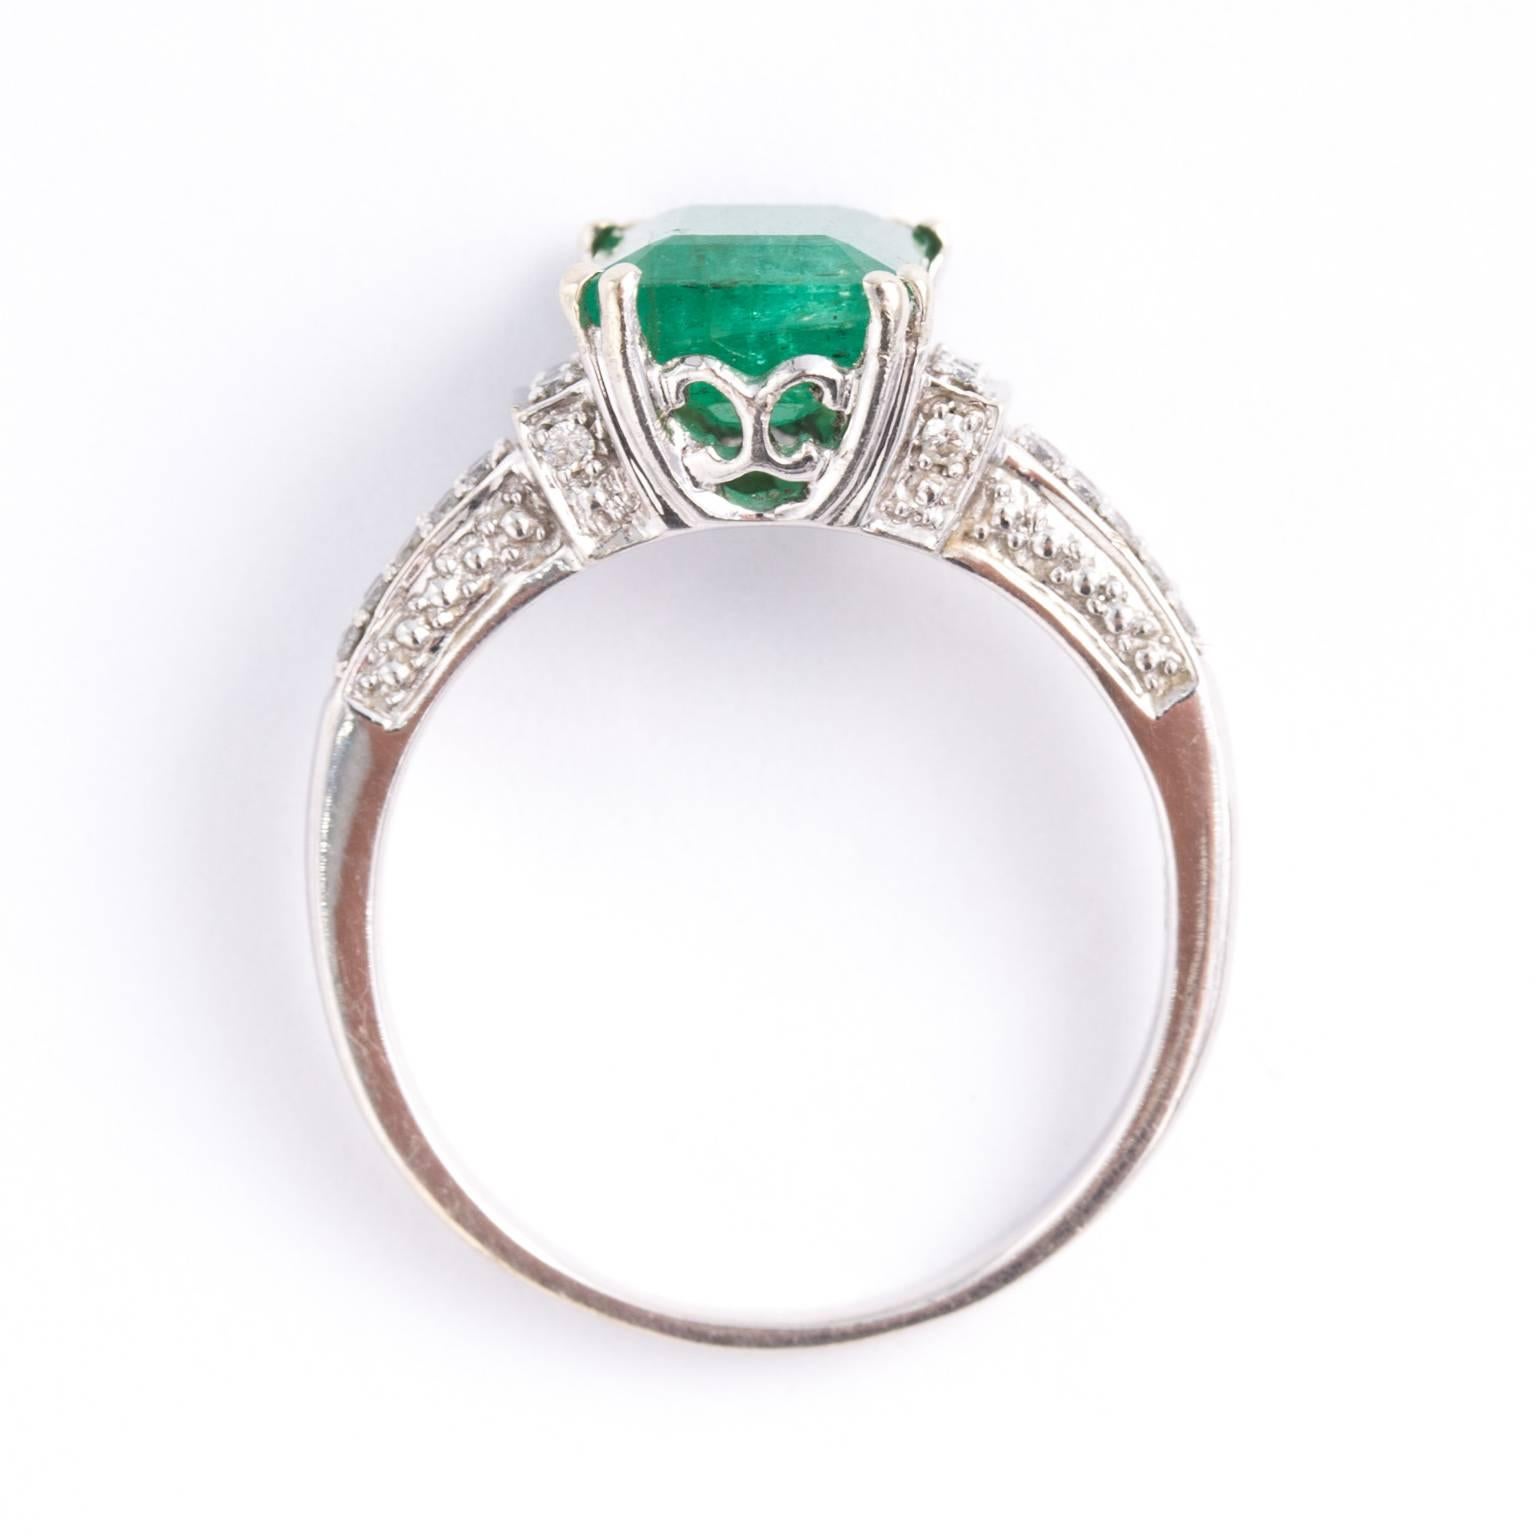  Beautiful ring constructed from solid 14k white gold. (RING SIZE: 8) The ring showcasing a very lovely natural Colombian Emerald, with Saturated rich green color with a slight bluish tint - which is the most desirable green of all emeralds. It is